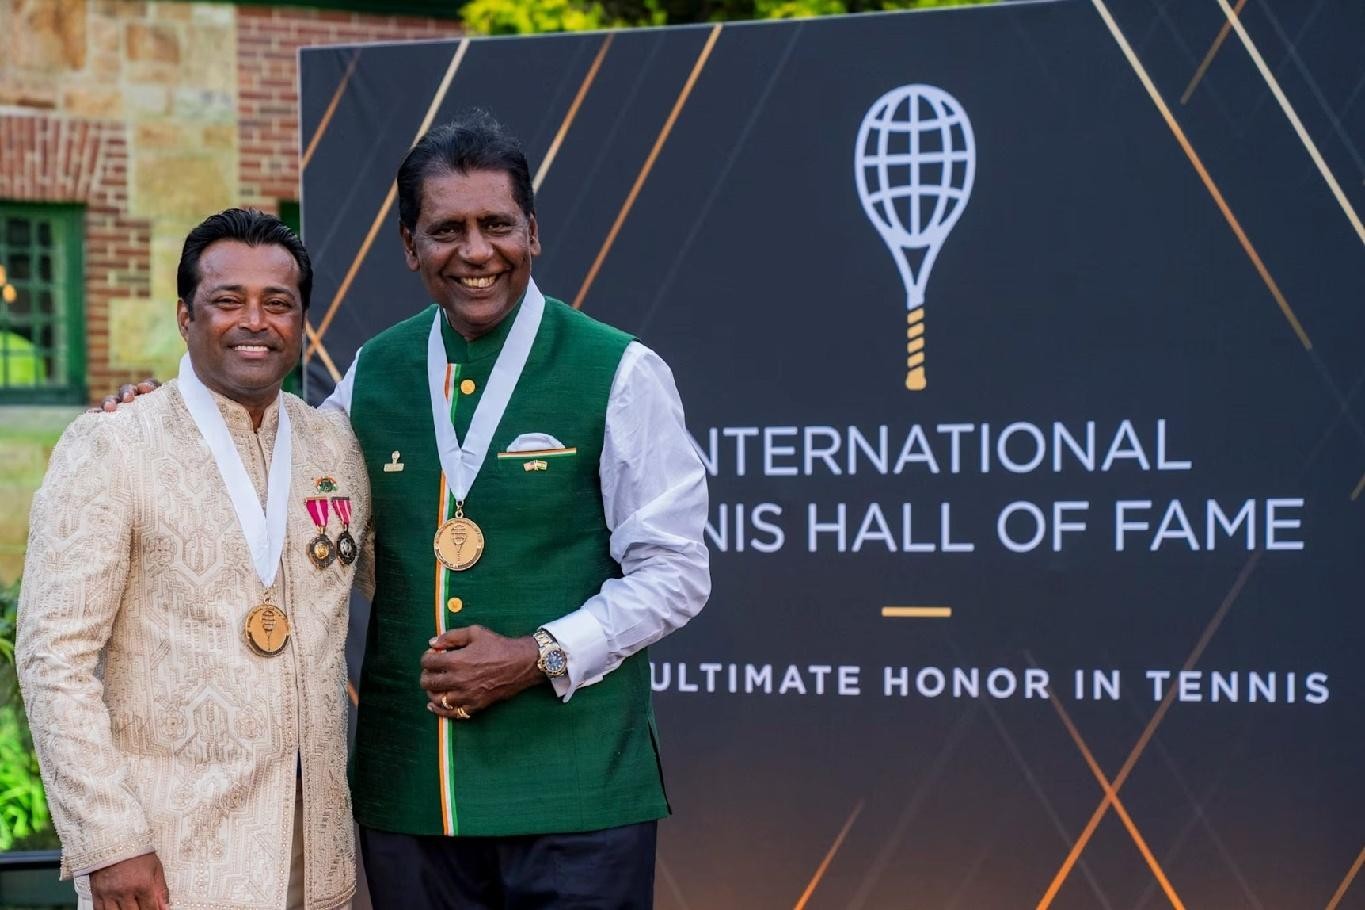 Paes and Amritraj Make History as First Asian Men in Tennis Hall of Fame